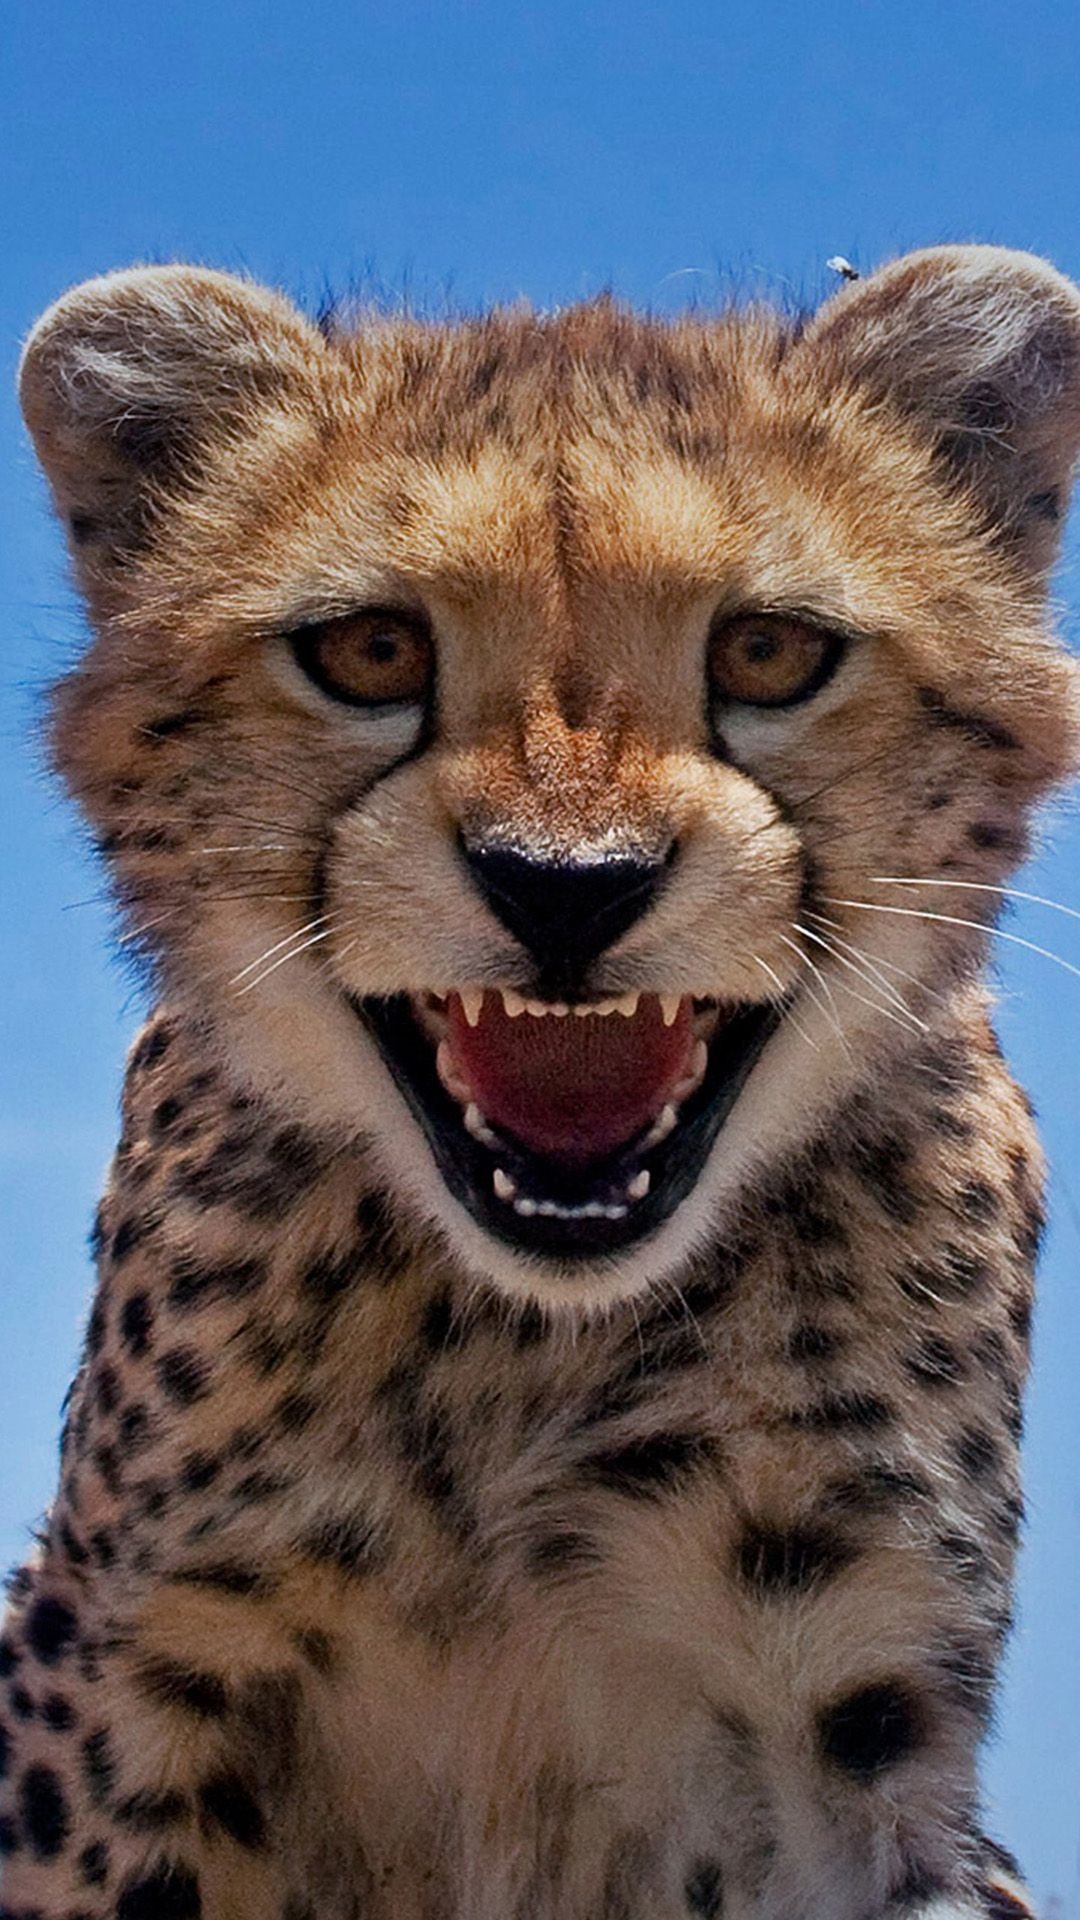 Baby cheetah wallpaper, Cute and innocent, Captivating and adorable, Precious wildlife, 1080x1920 Full HD Phone